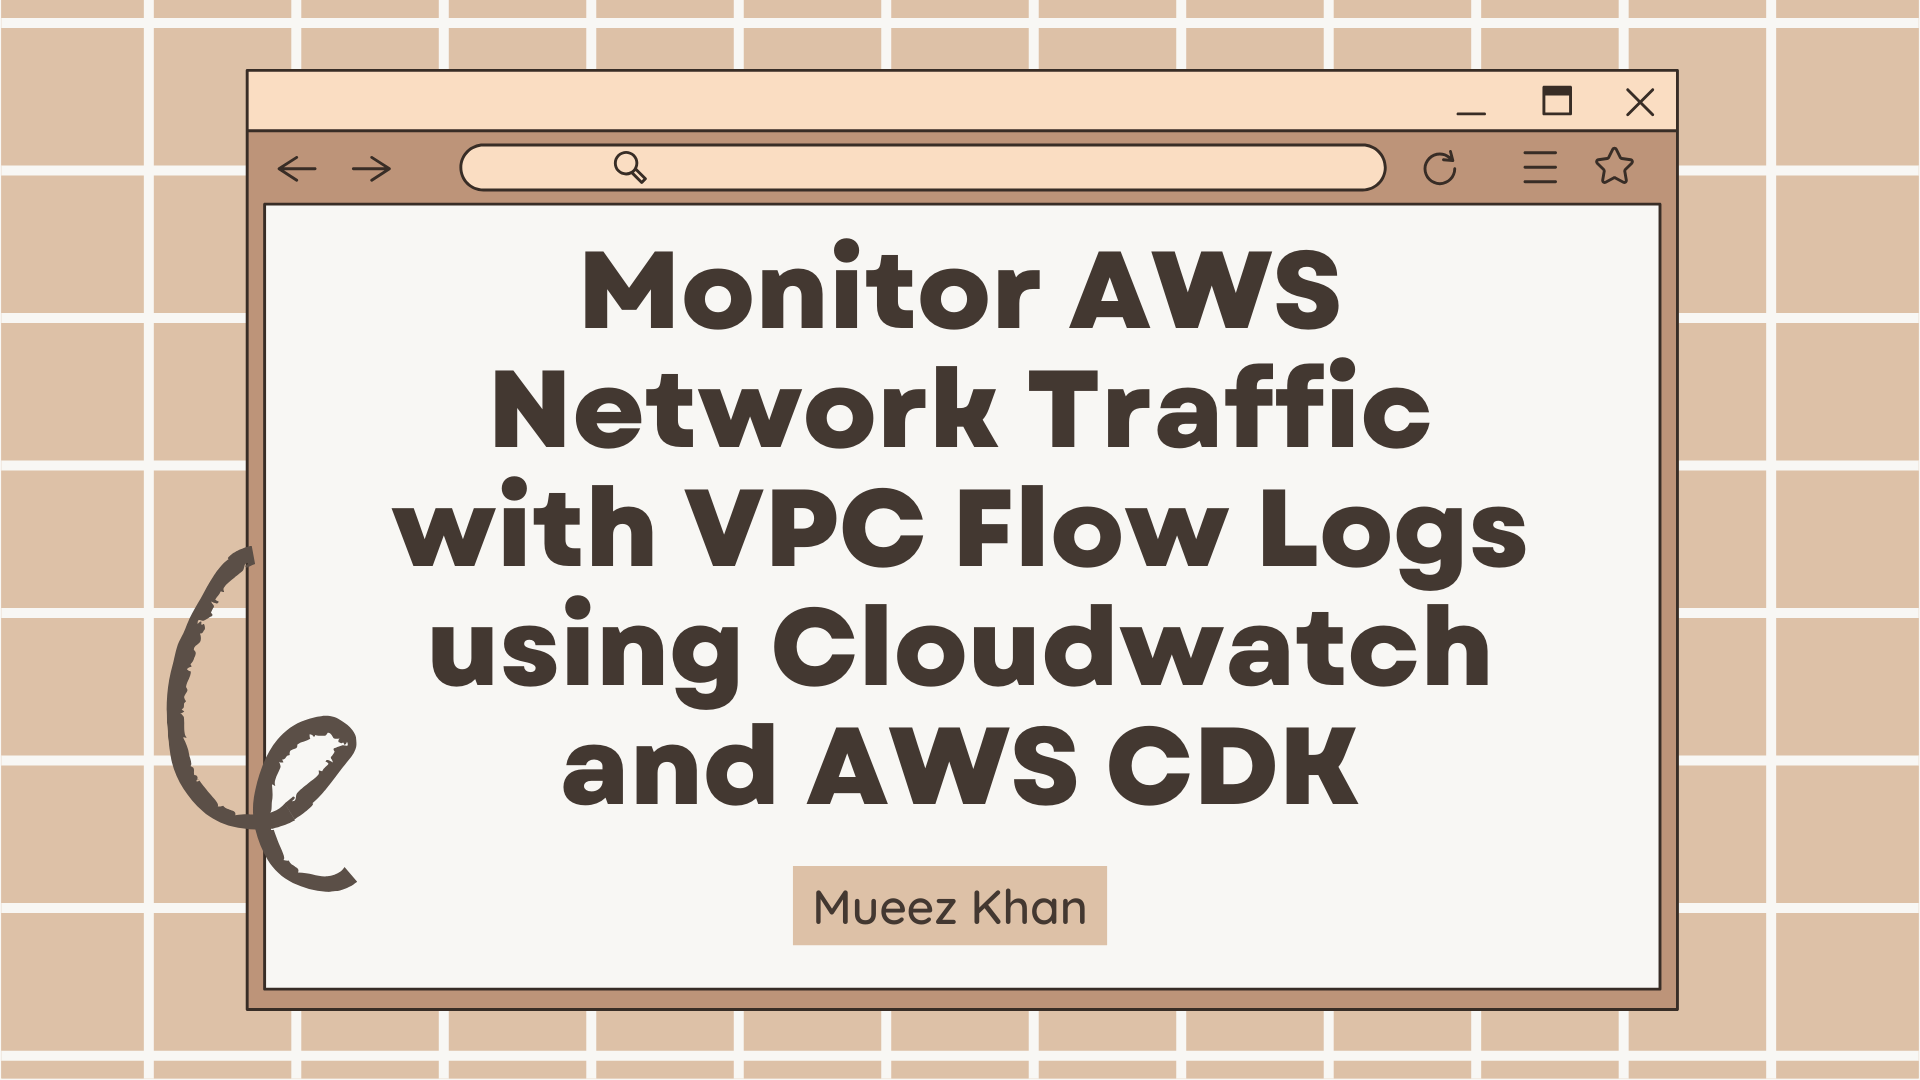 Monitor AWS Network Traffic with VPC Flow Logs using Cloudwatch and AWS CDK